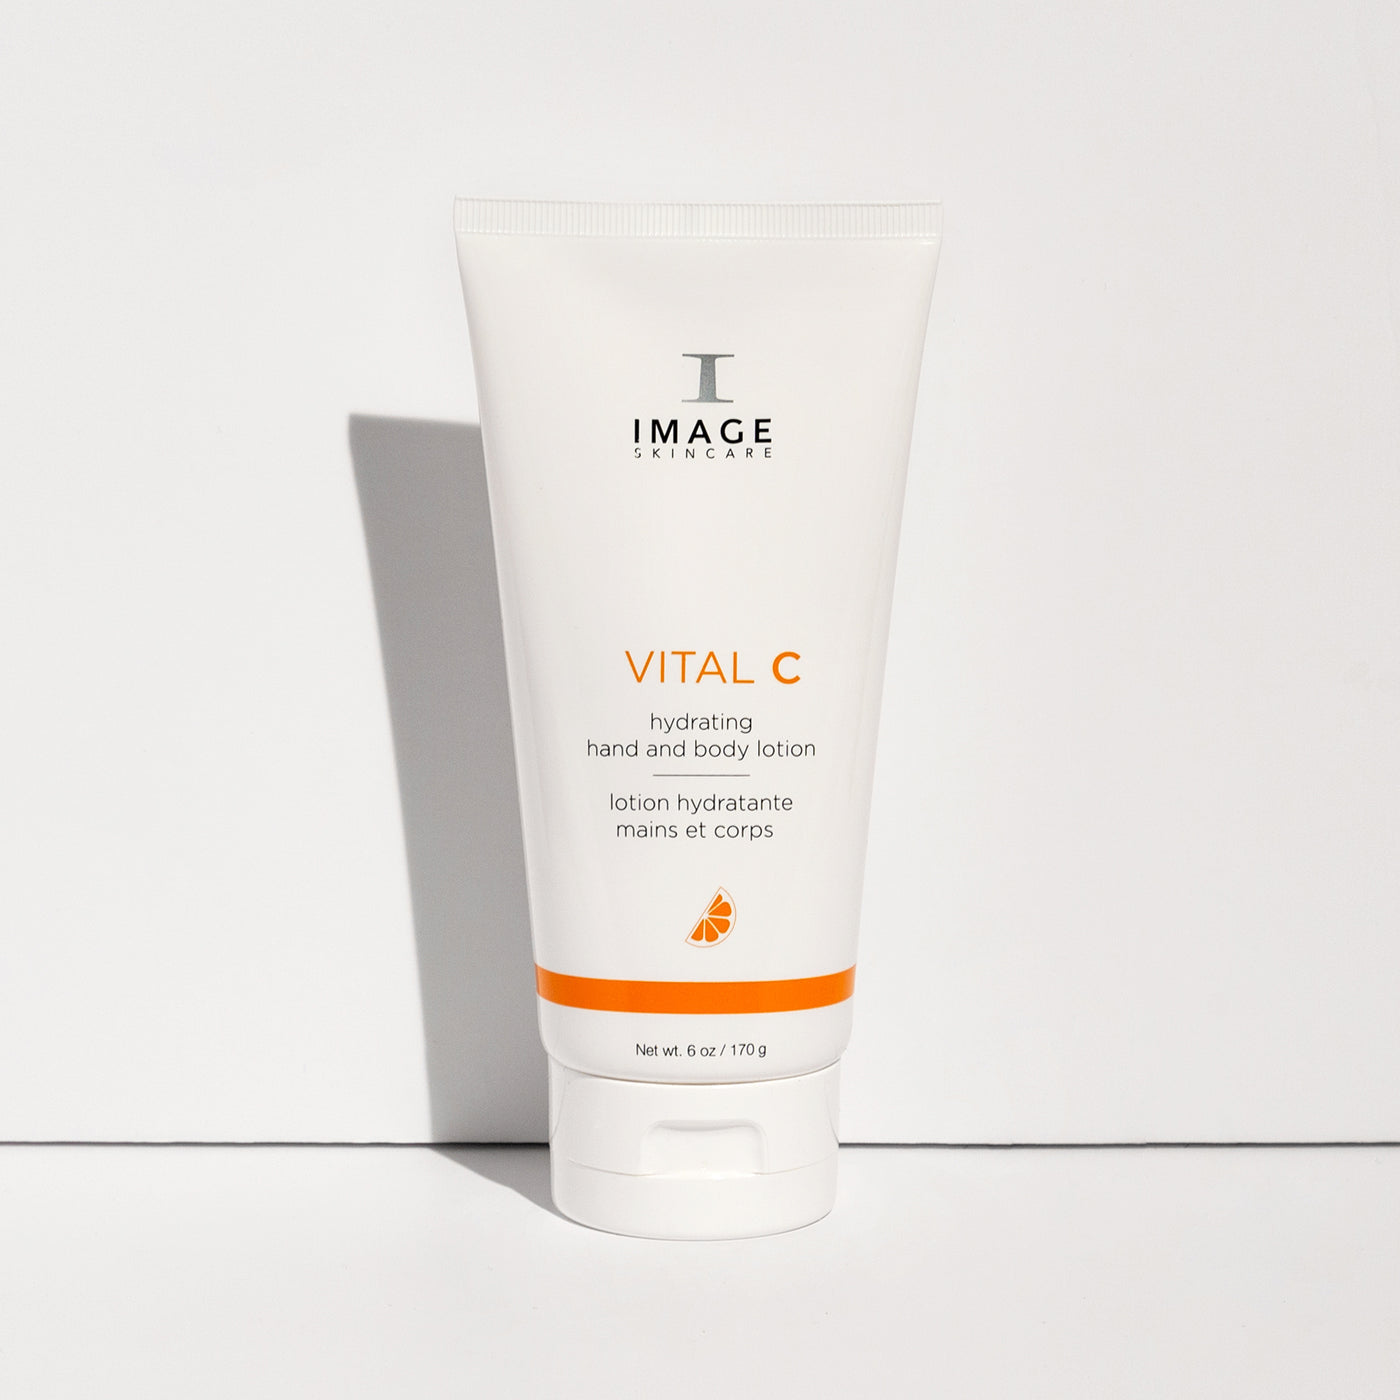 VITAL C Hydrating Hand and Body Lotion (6 oz)